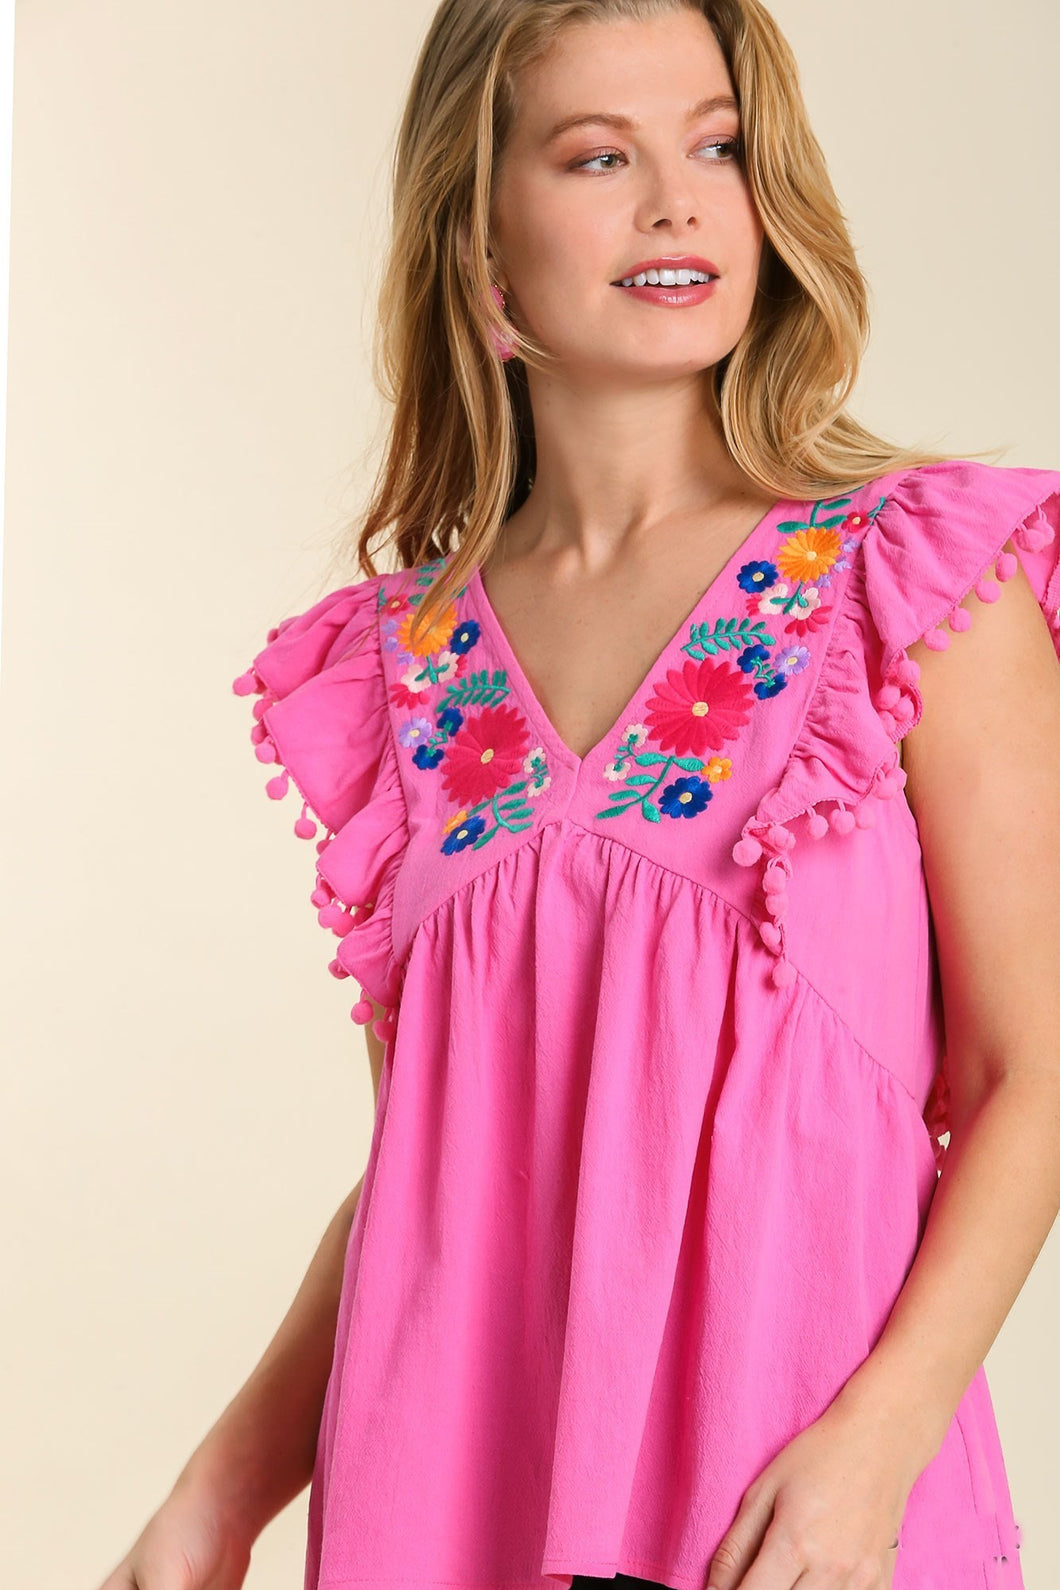 Umgee Floral Embroidery Top with Pom Pom Details in Bubble Pink  Umgee   